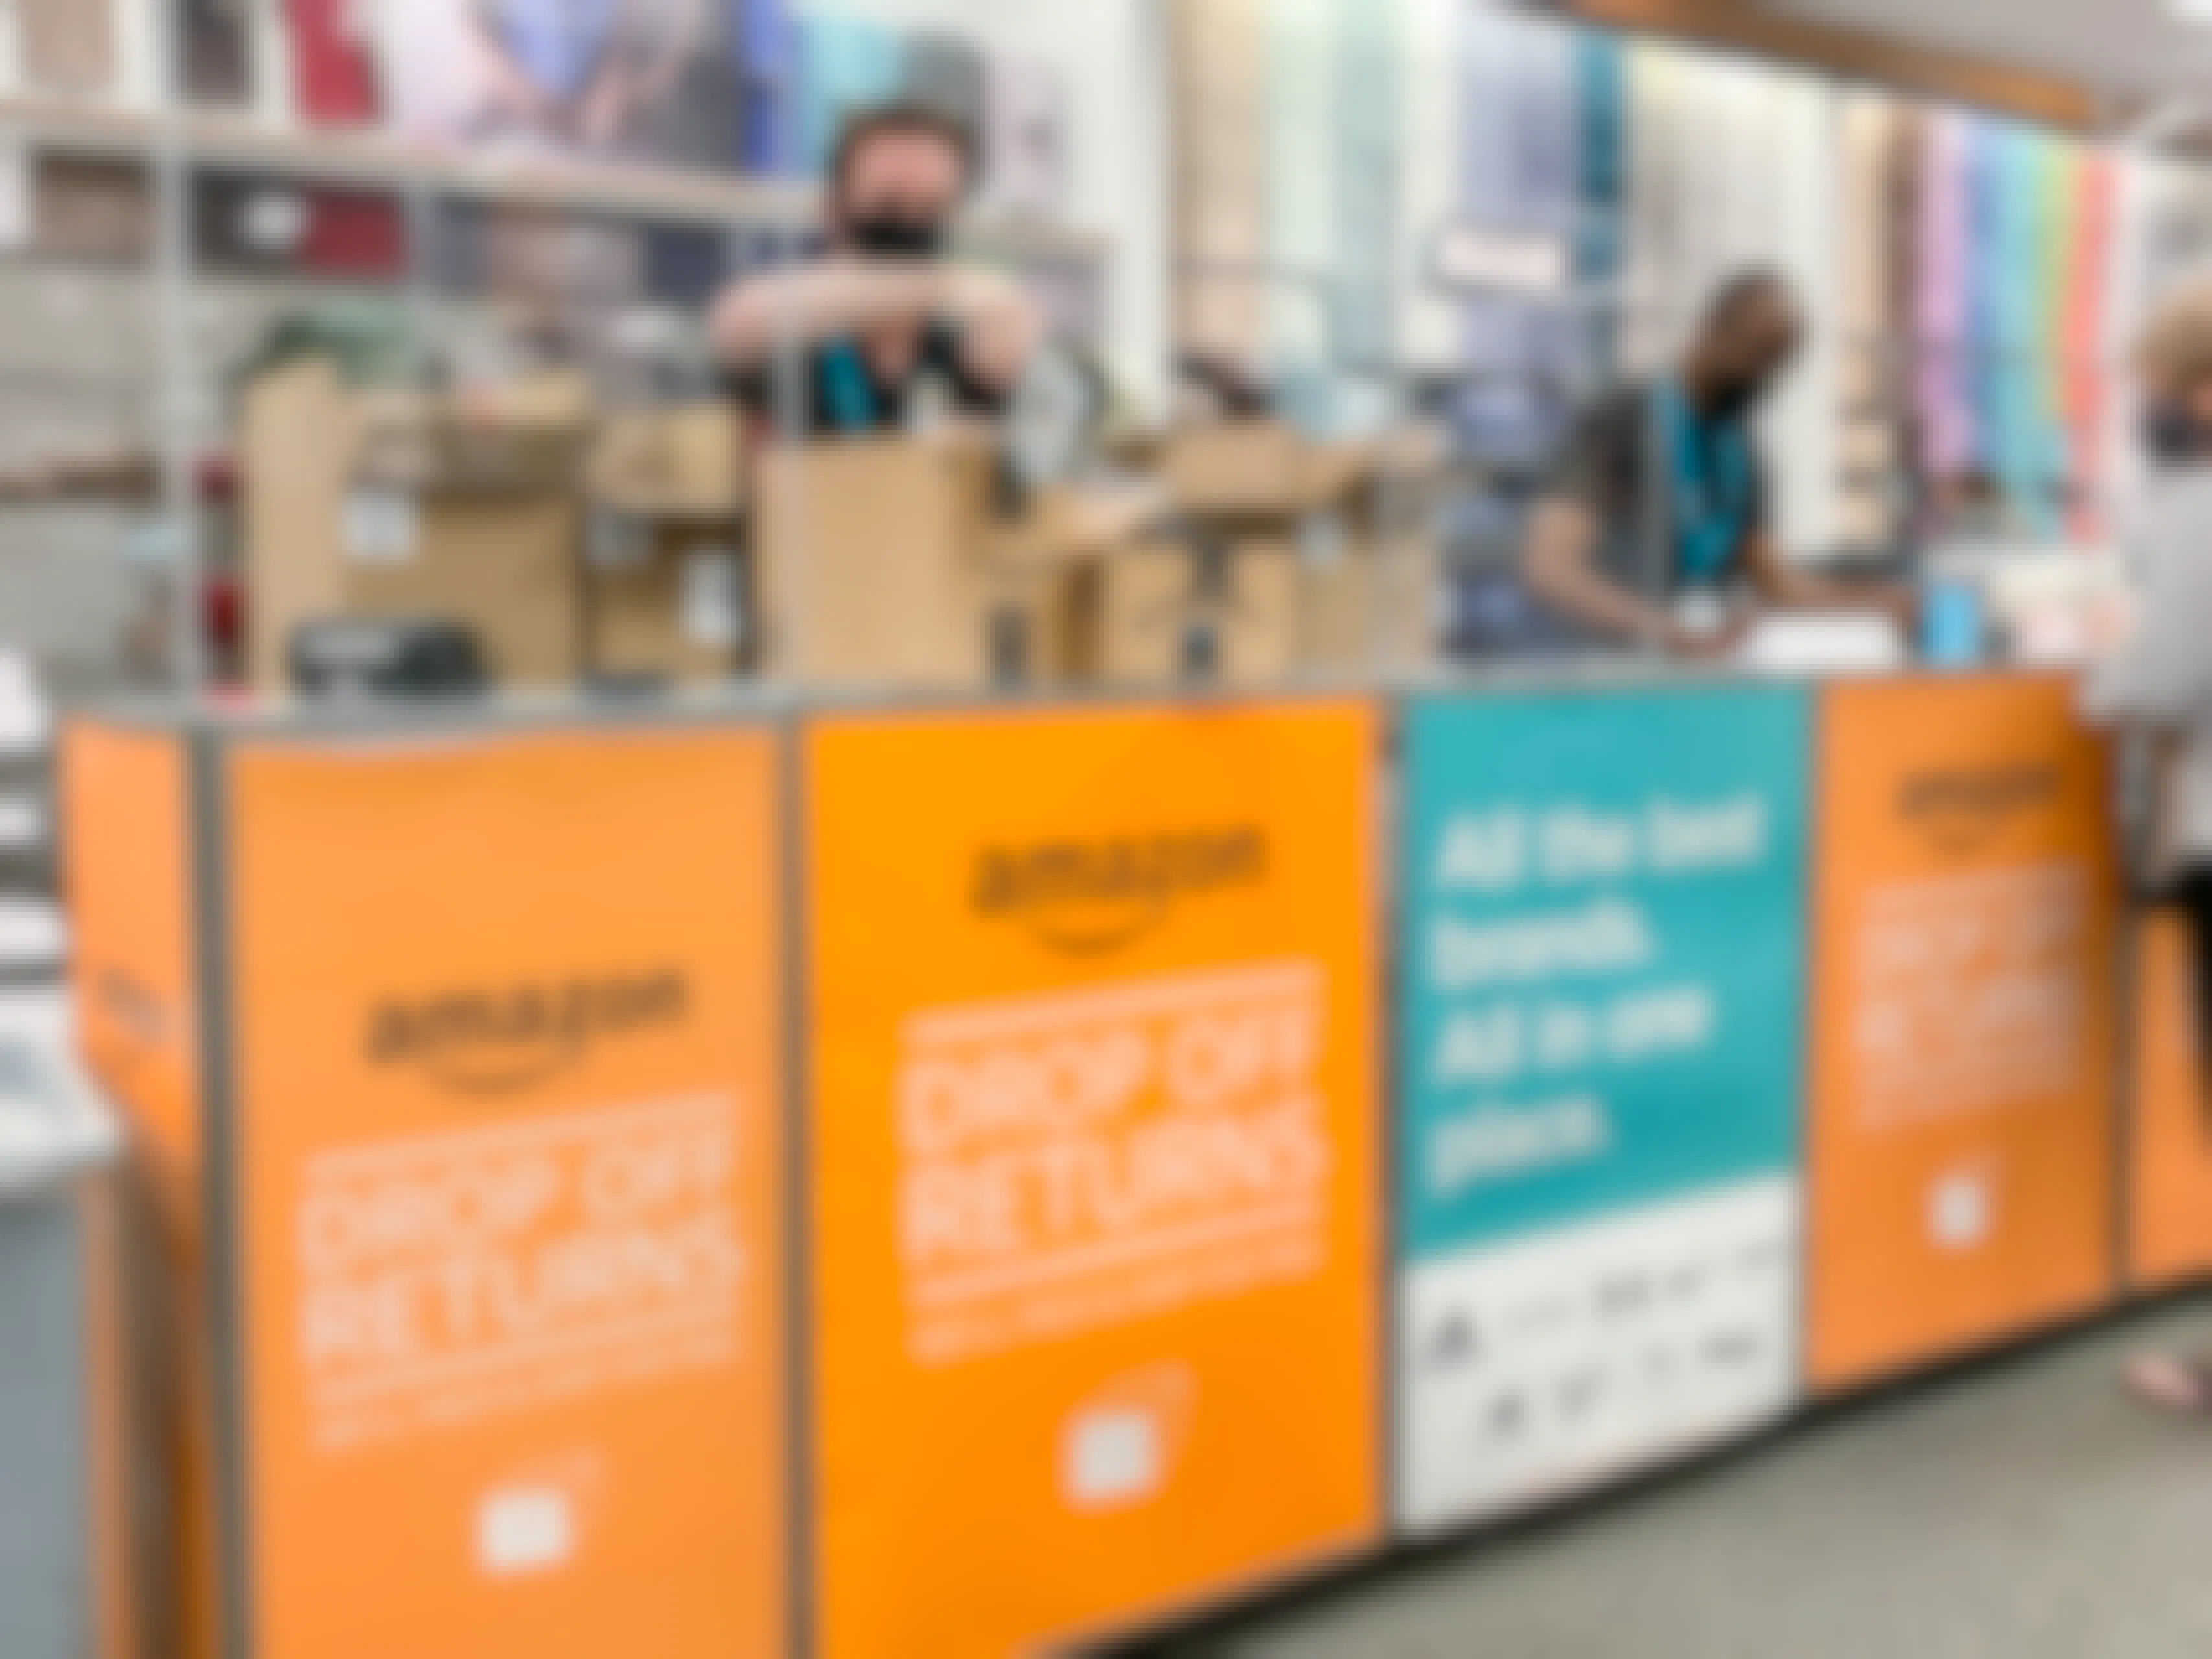 A Kohl's employee taping an Amazon return box at the Amazon Drop Off Returns counter inside Kohl's.